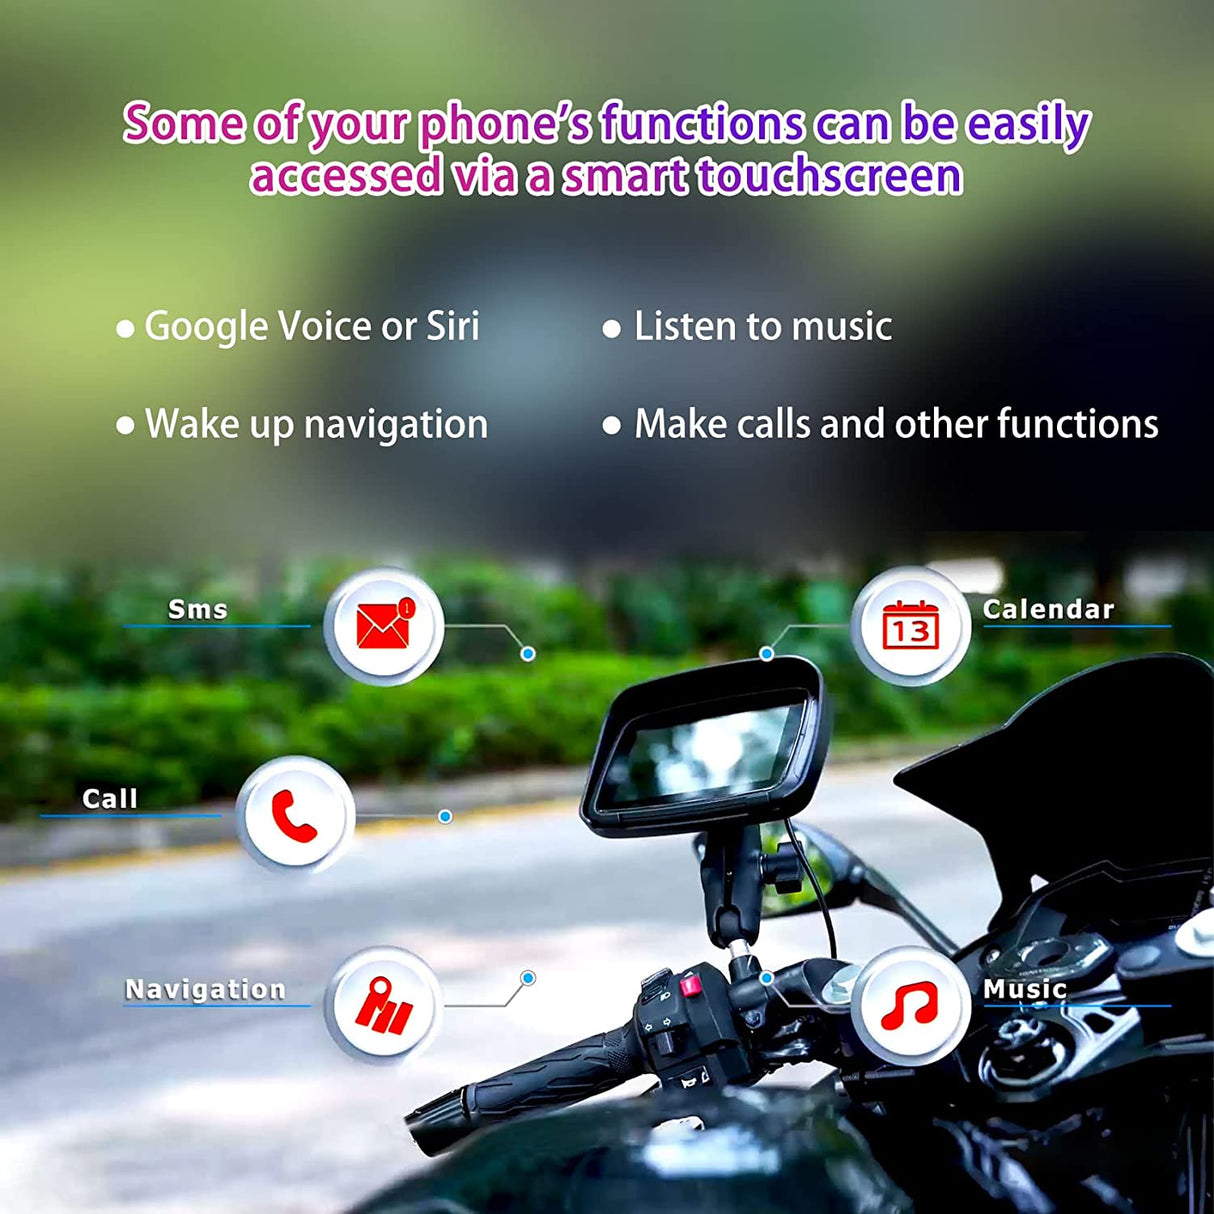 All-Terrain Motorcycle GPS Navigation Device with Wireless CarPlay/Wireless Android Auto, 5"